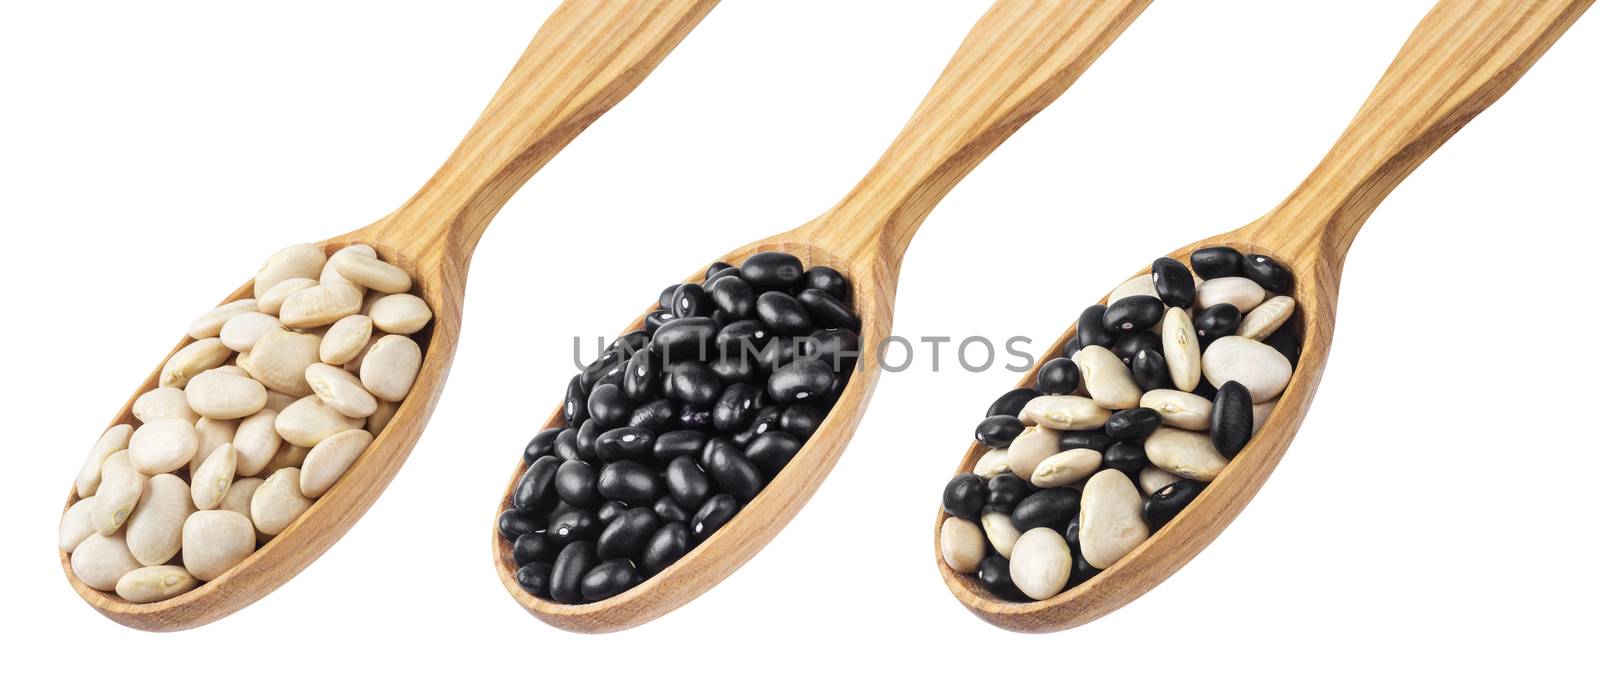 Kidney beans in wooden spoon isolated on white background. Collection